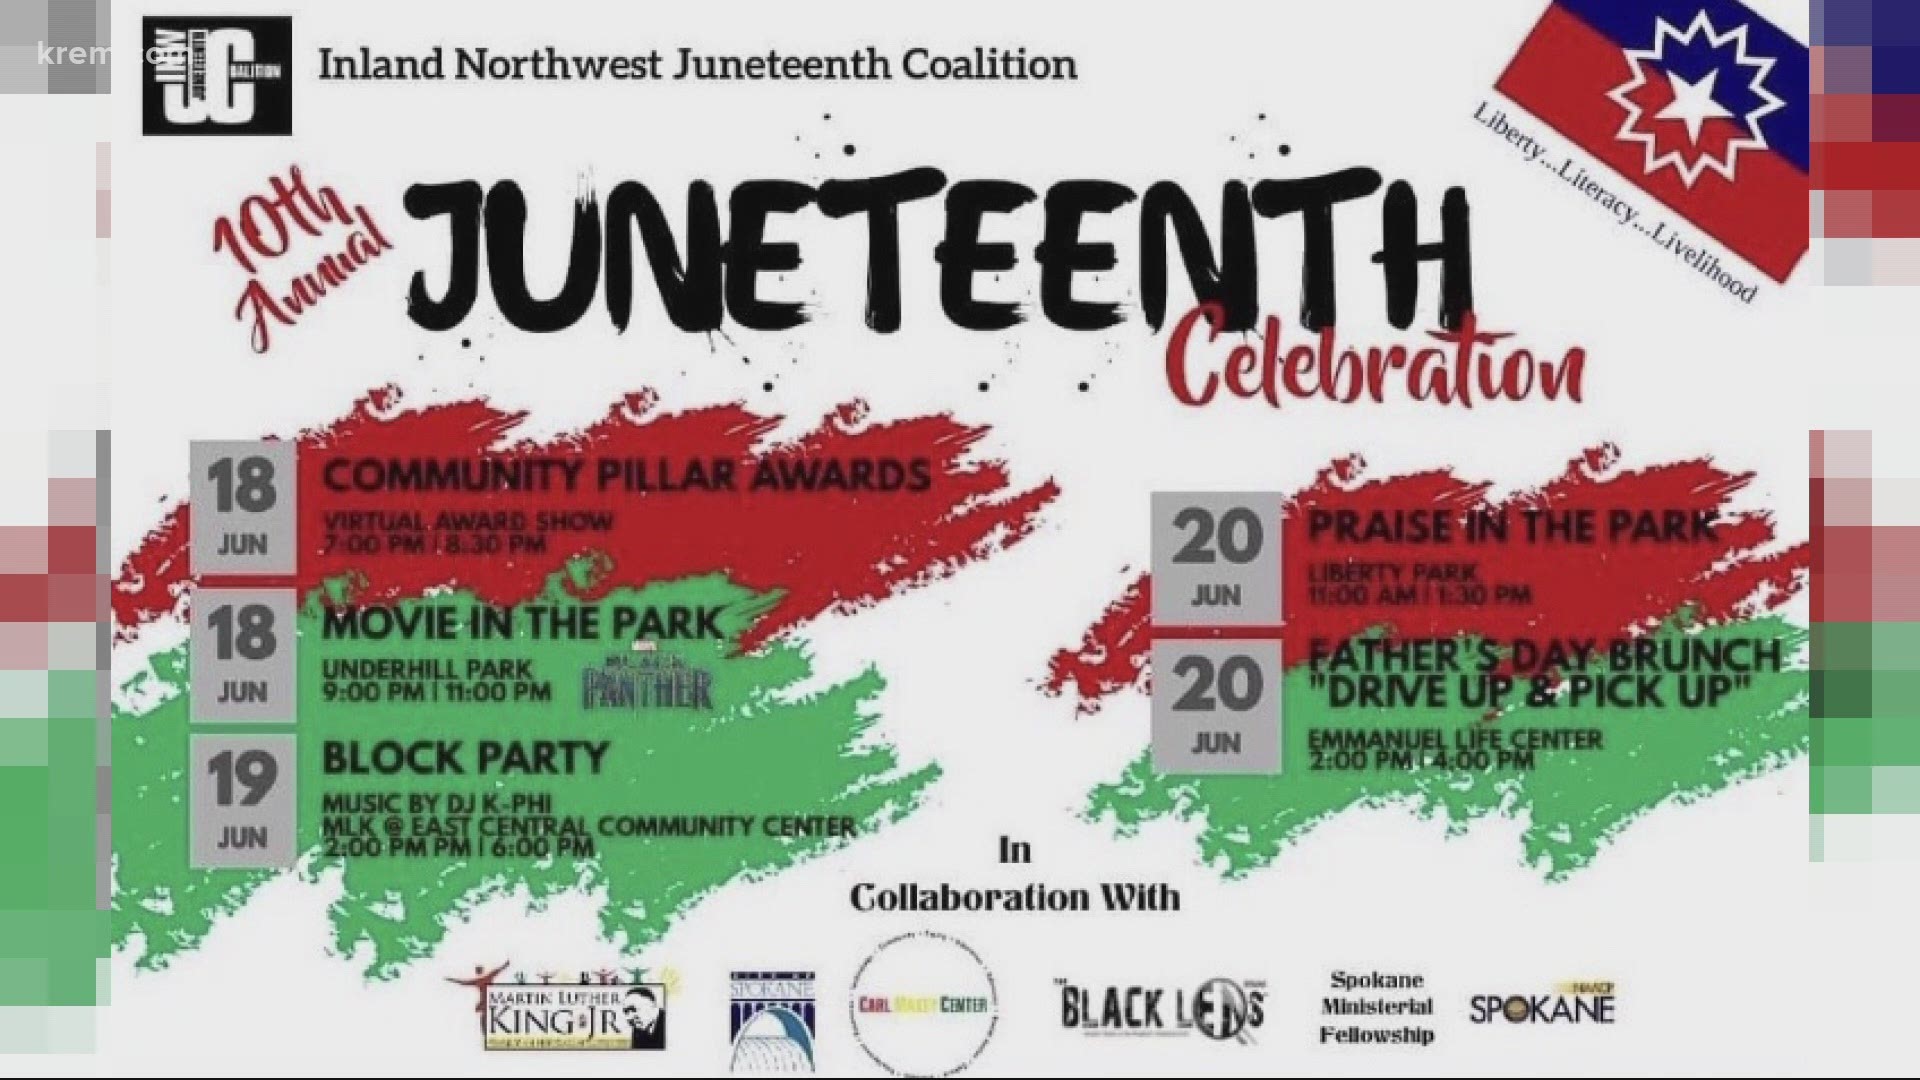 Juneteenth is officially a federal holiday. Here are the events happening across our area to celebrate.